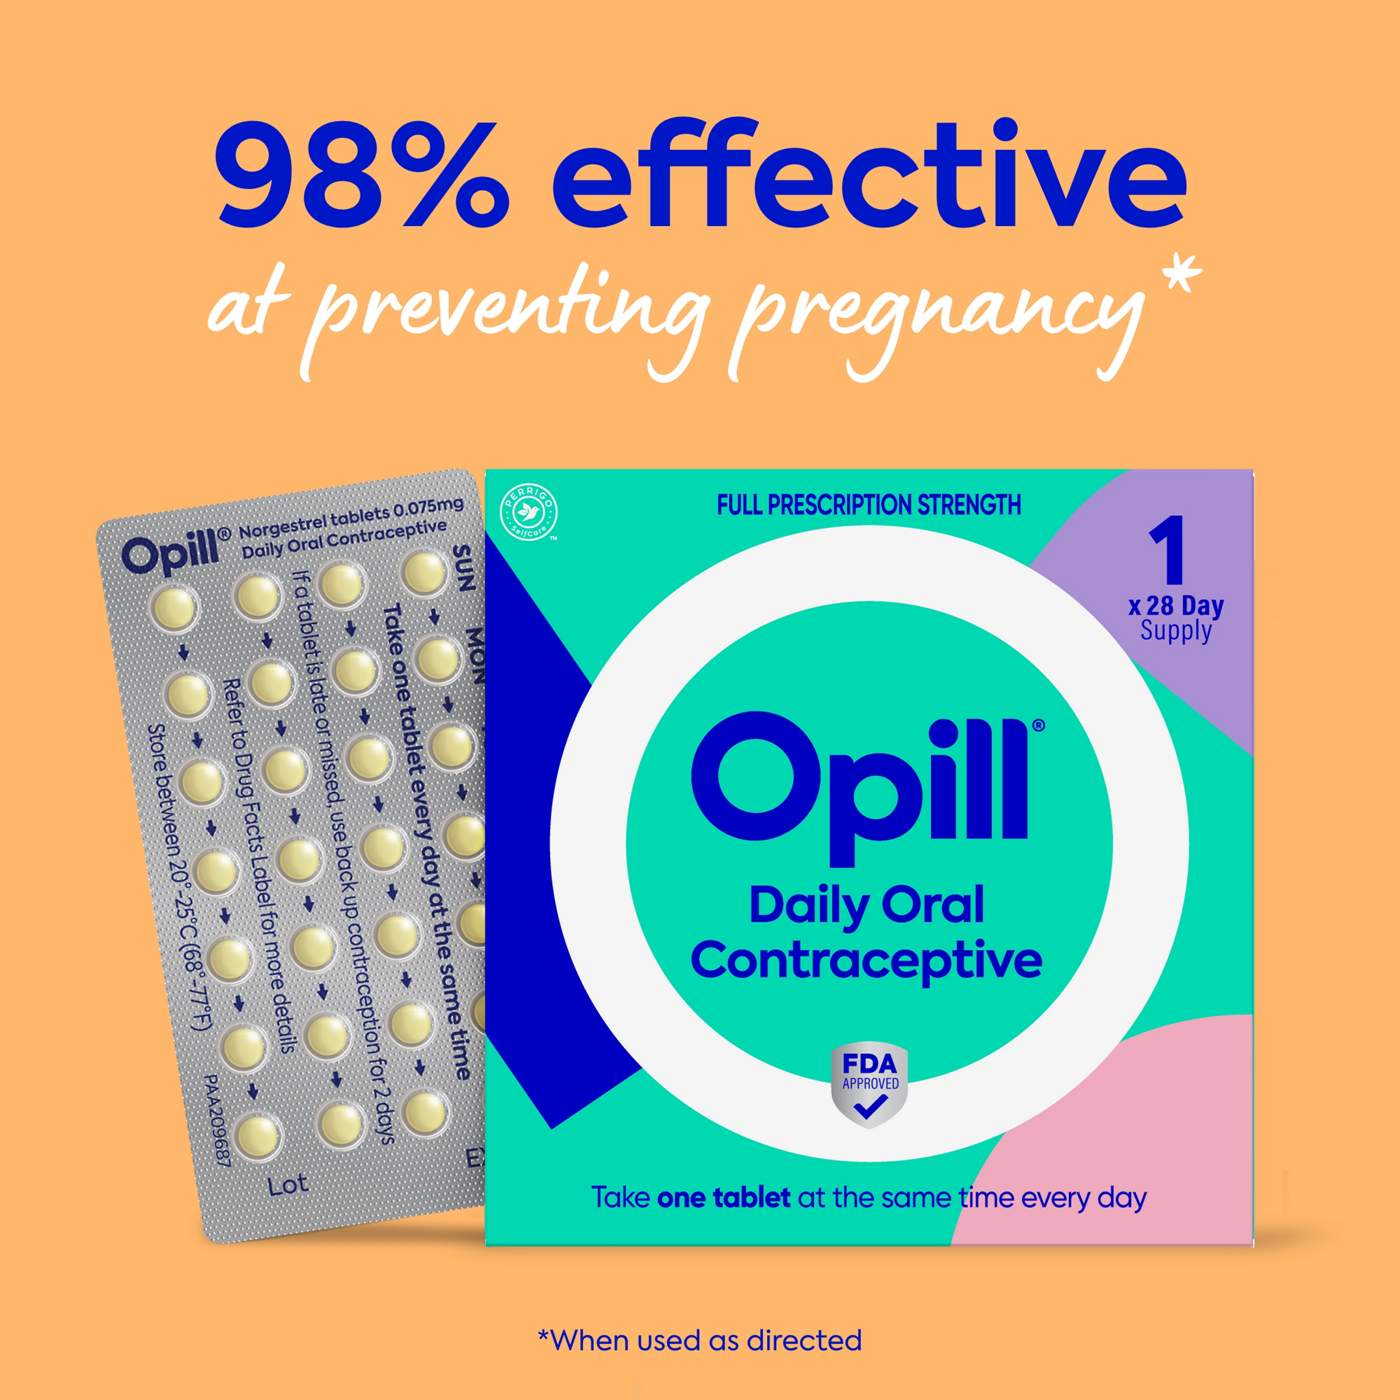 Opill Daily Oral Contraceptive Norgestrel Tablets - 0.075 mg; image 10 of 11